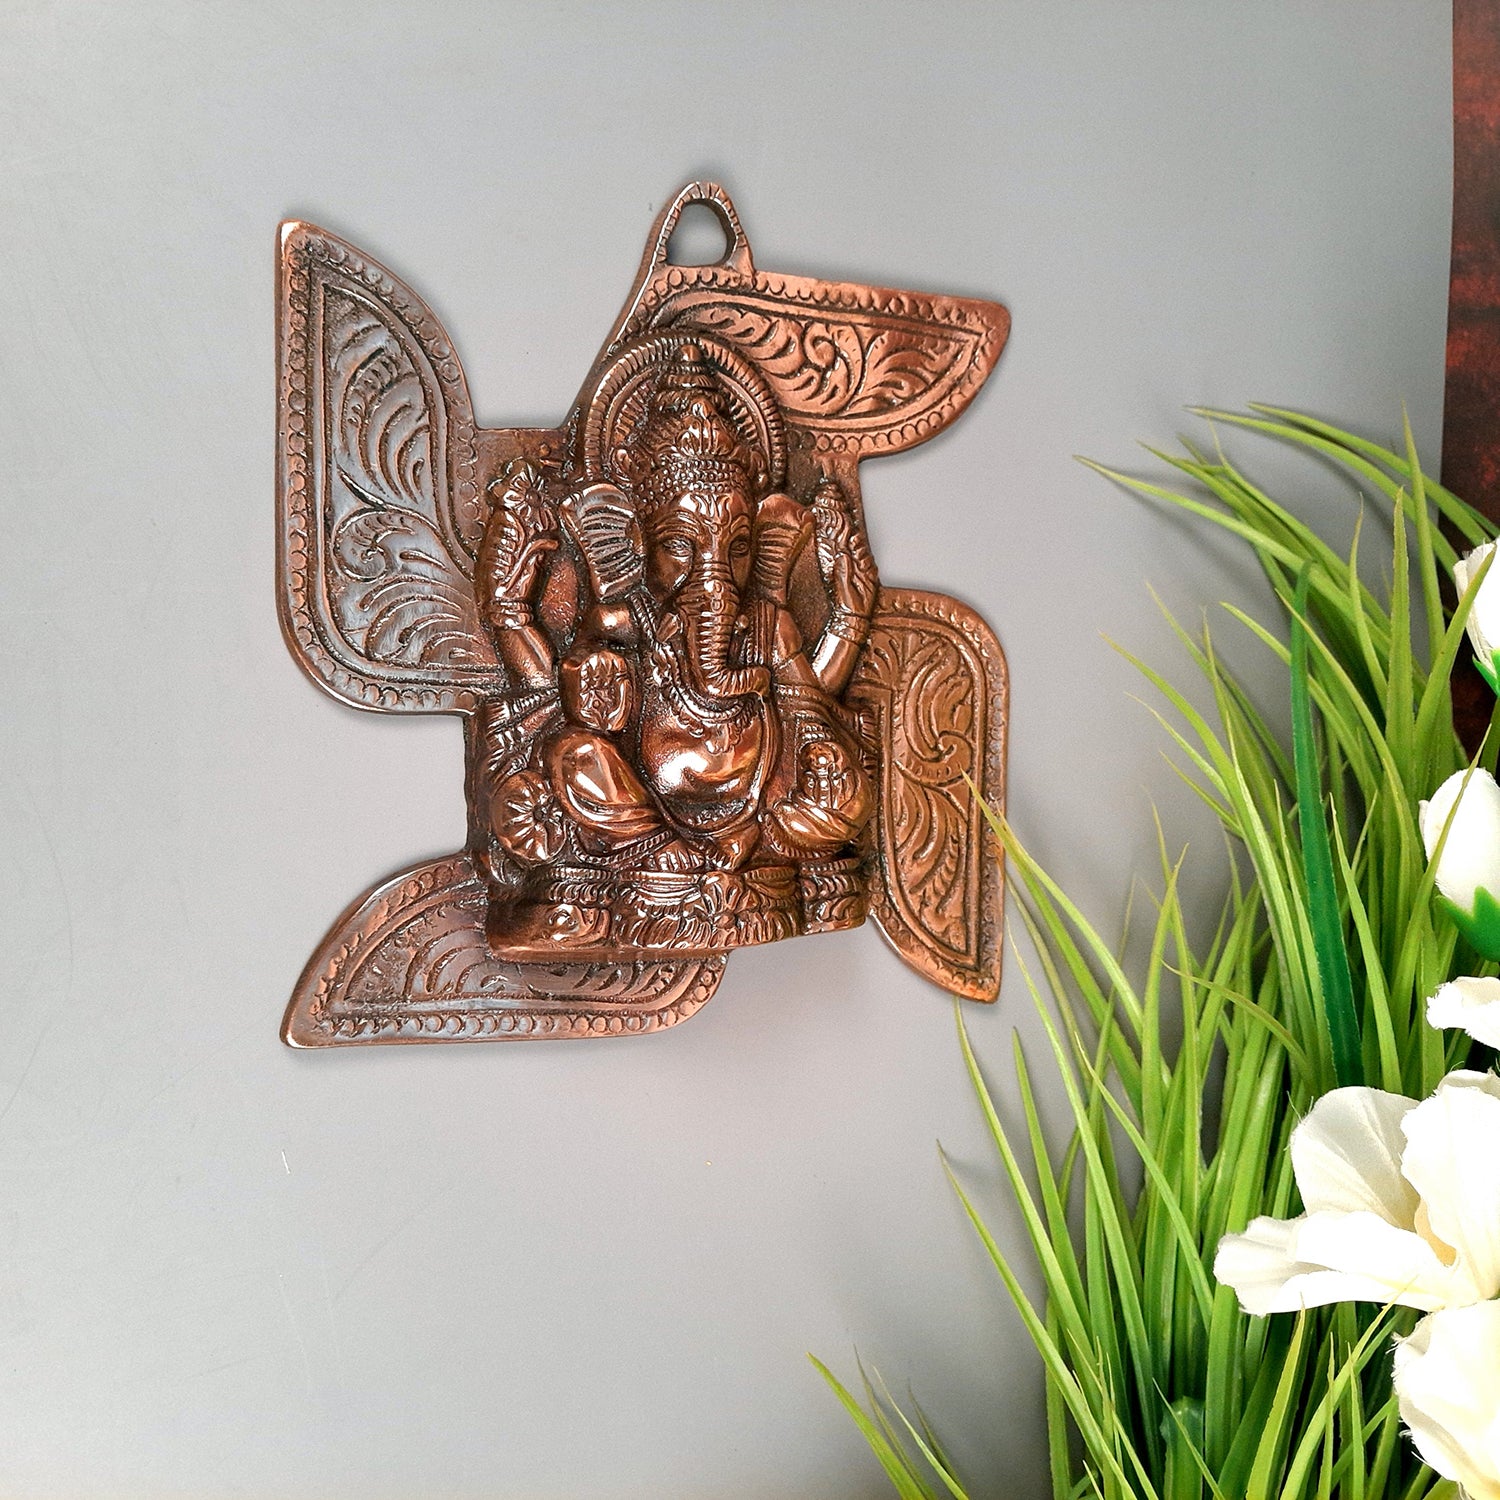 Ganesh Idol Wall Hanging | Lord Ganesha With Swastik Wall Statue Decor - For Puja, Home, Entrance, Living Room & Gift - 8 Inch - Apkamart